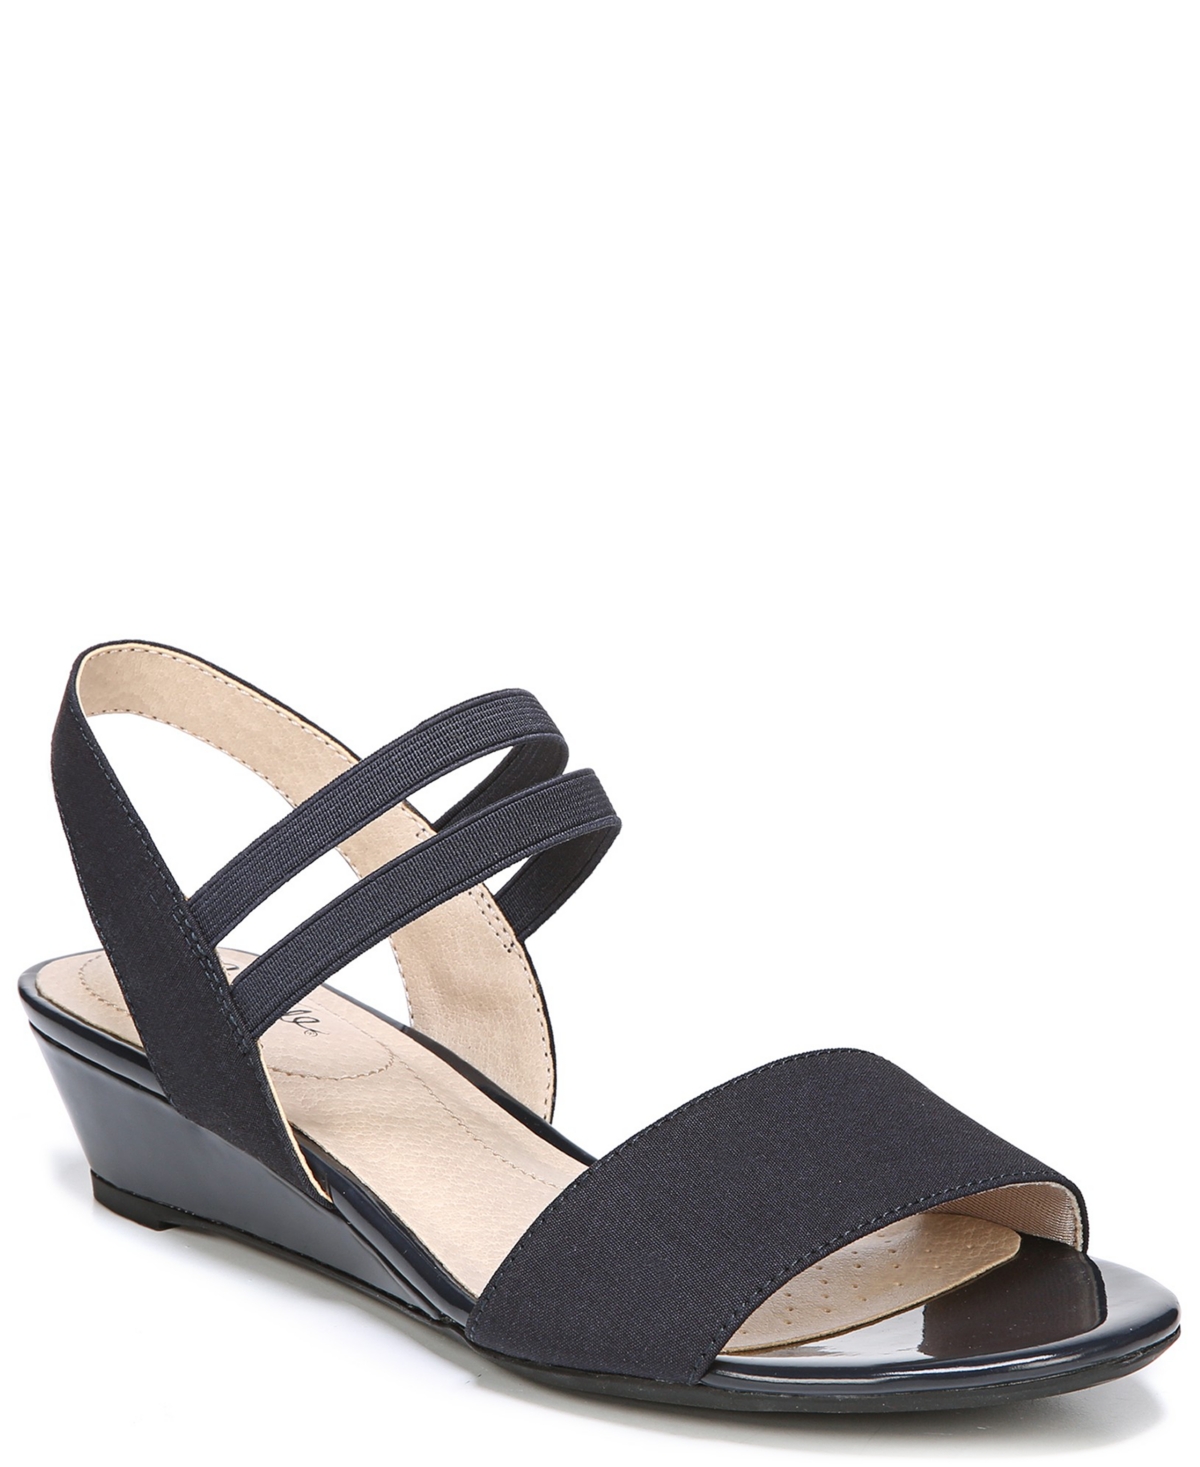 Women's Yolo Ankle Strap Wedge Sandals - Tender Taupe